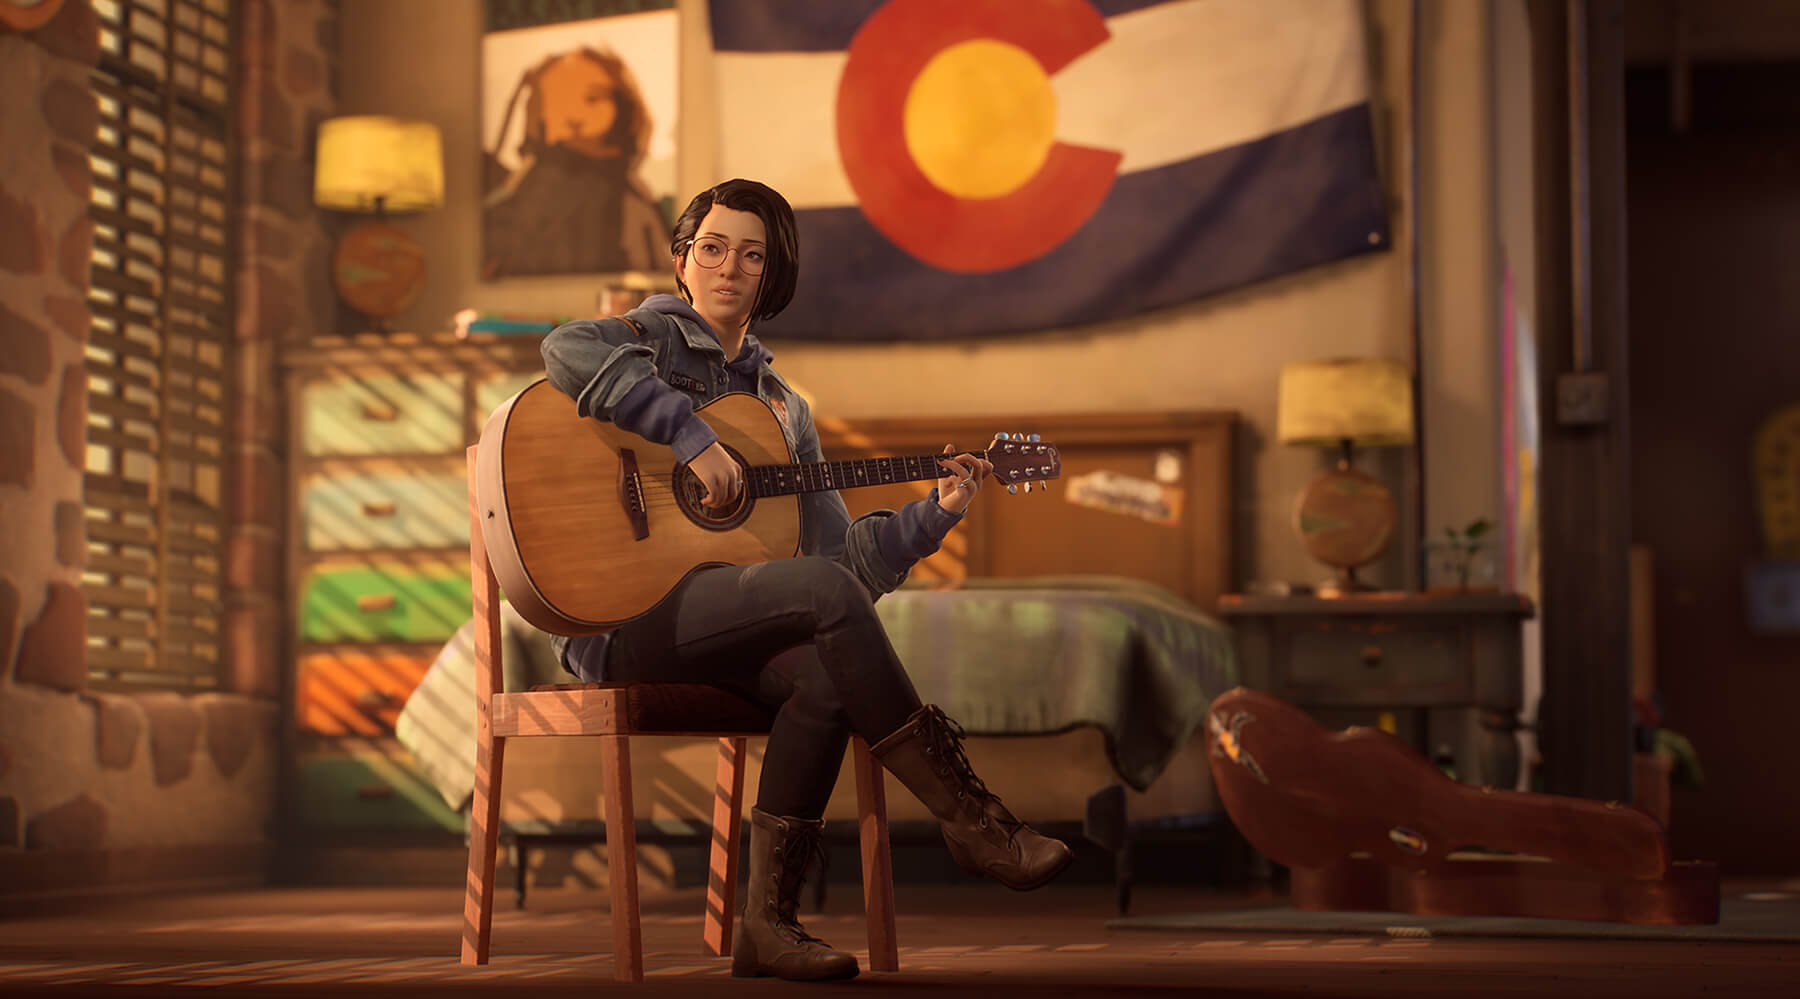 A screenshot of Alex Chen playing guitar in front of a Colorado flag.